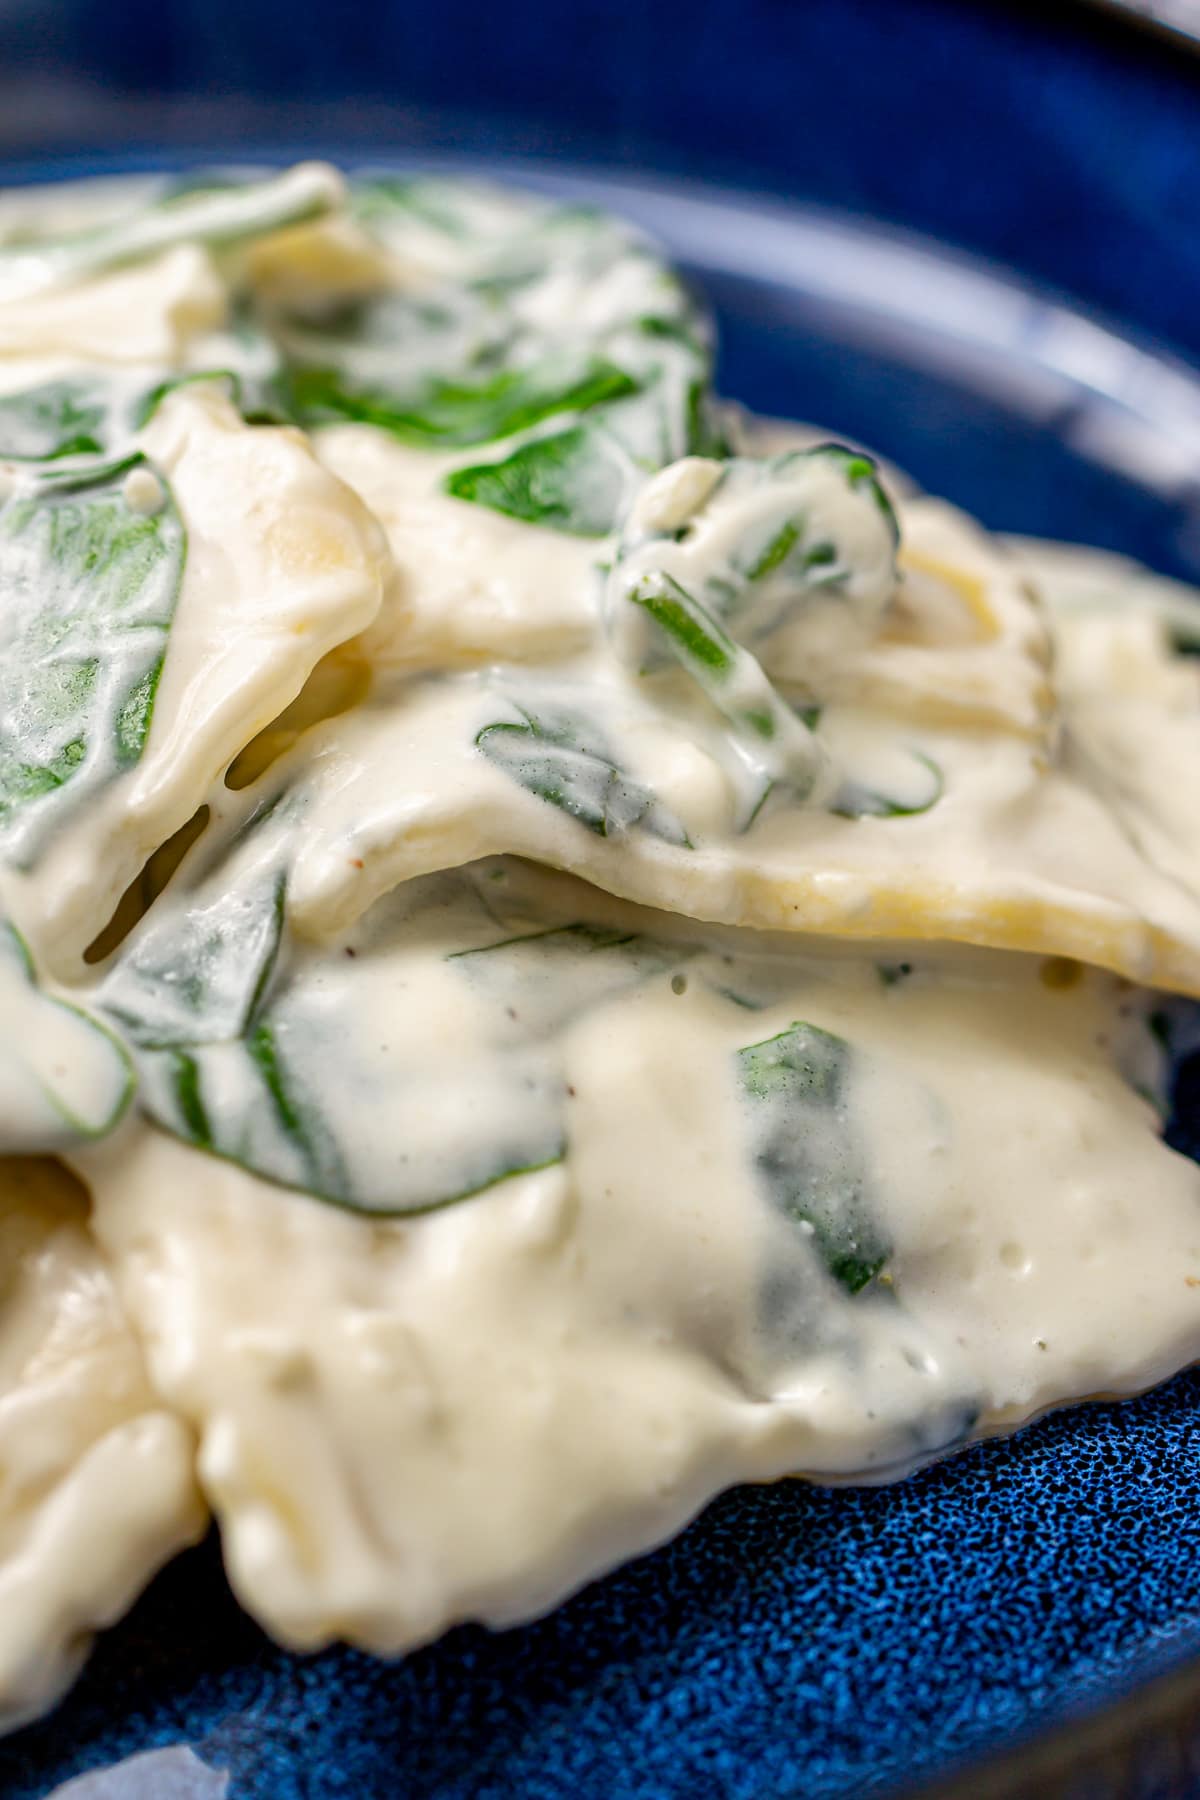 Creamy spinach and cheese ravioli in an elegant blue plate.